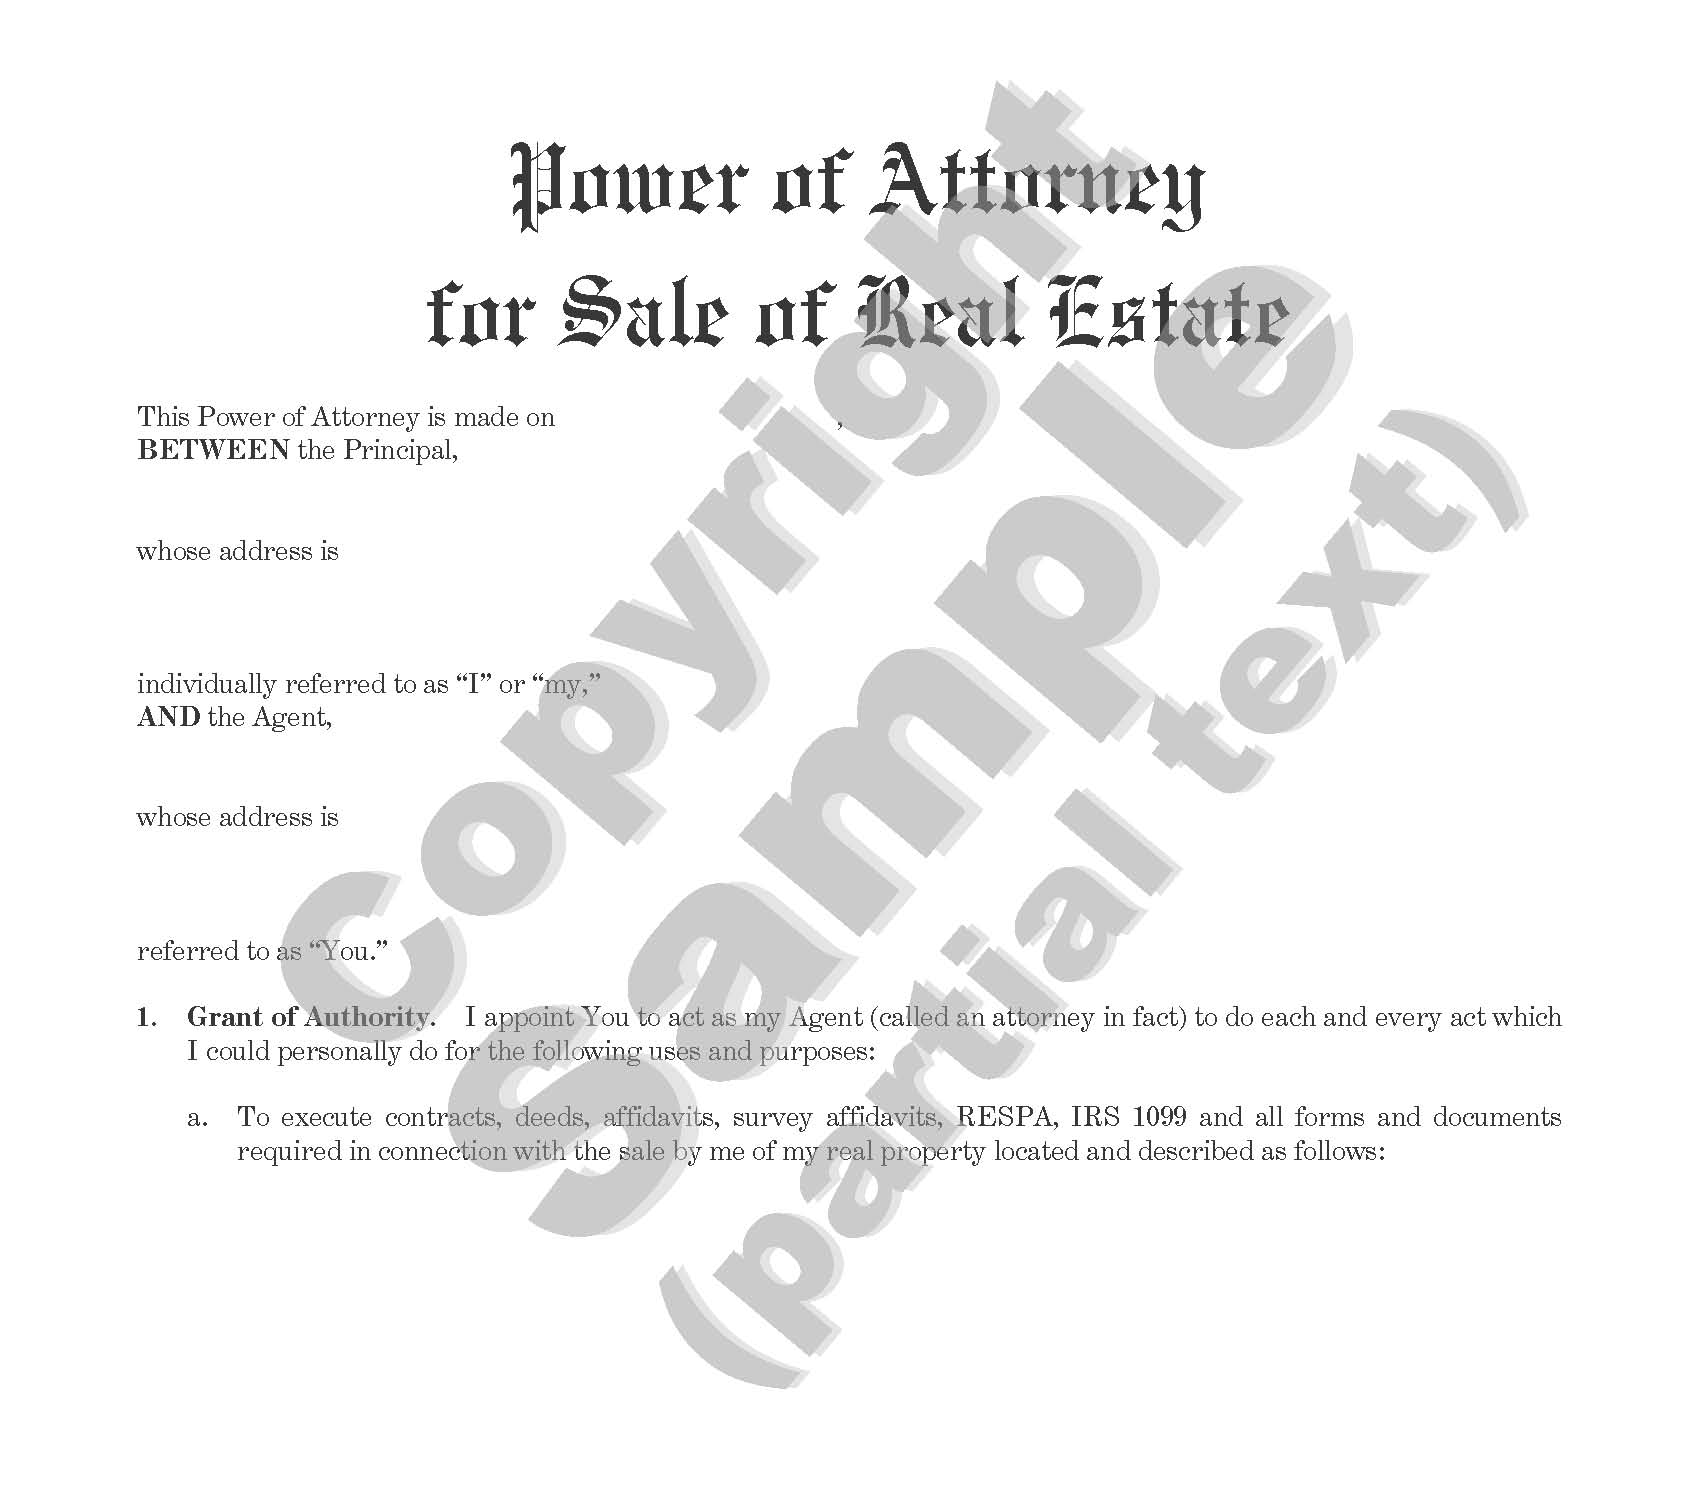 Power of Attorney for Sale of Real Estate